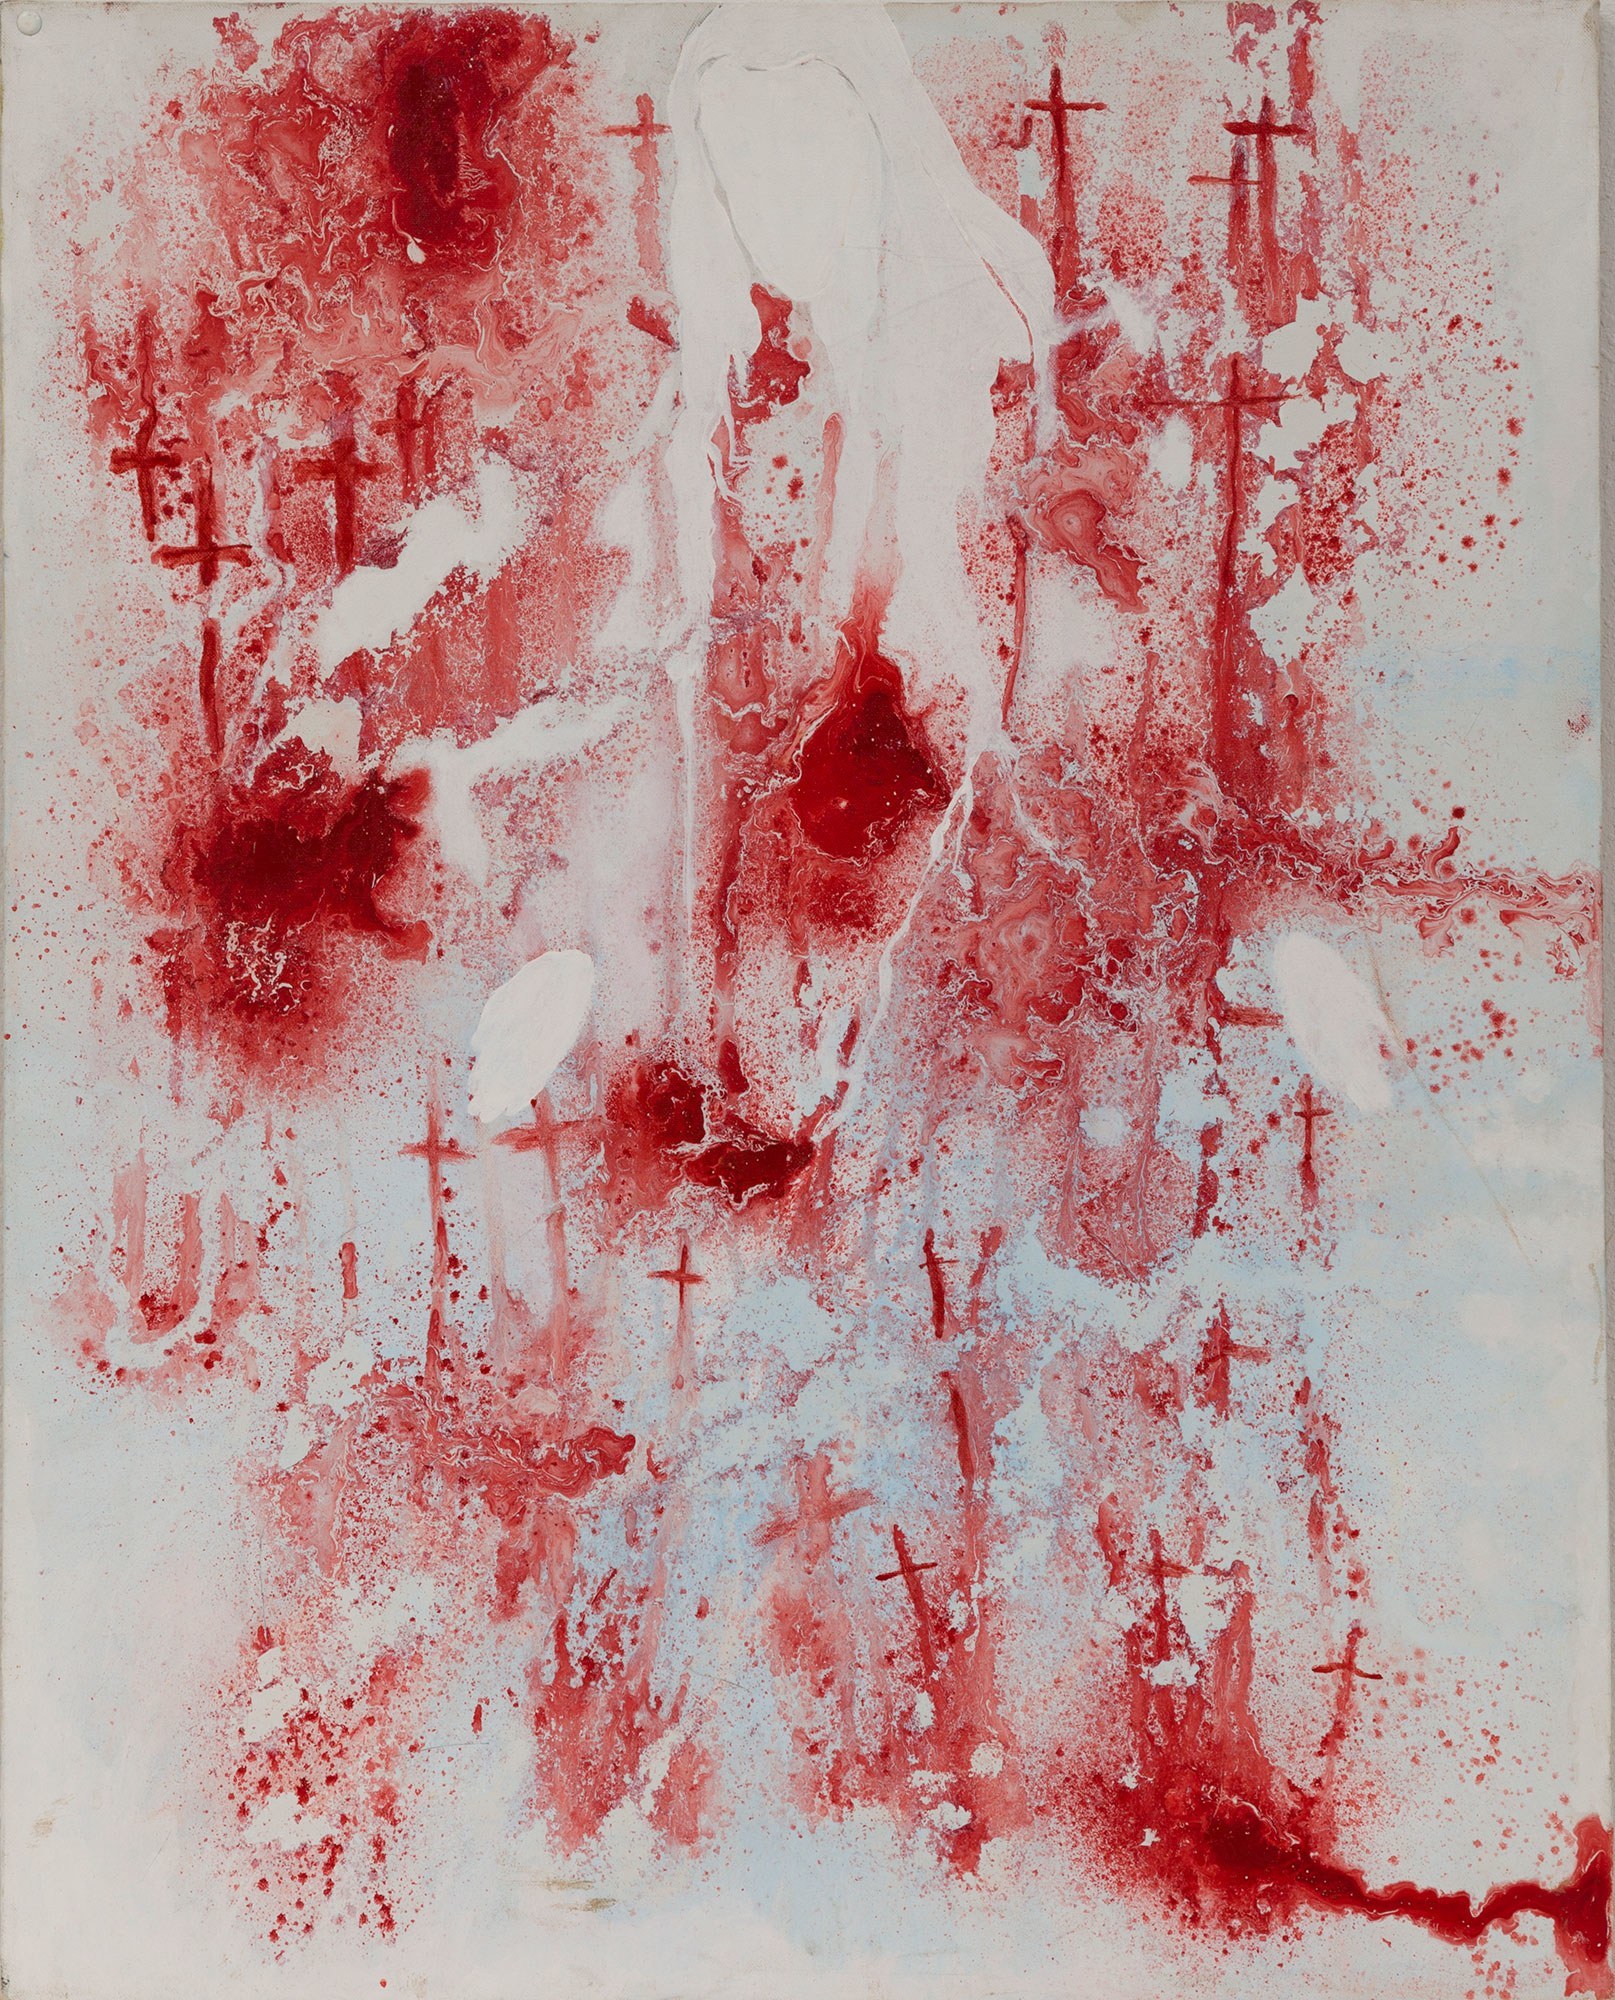 Bloody-looking splatters and wound-like patches of red paint on a white background with the head and hands of a ghostly Madonna figure in the background. Small red crosses dot the canvas.